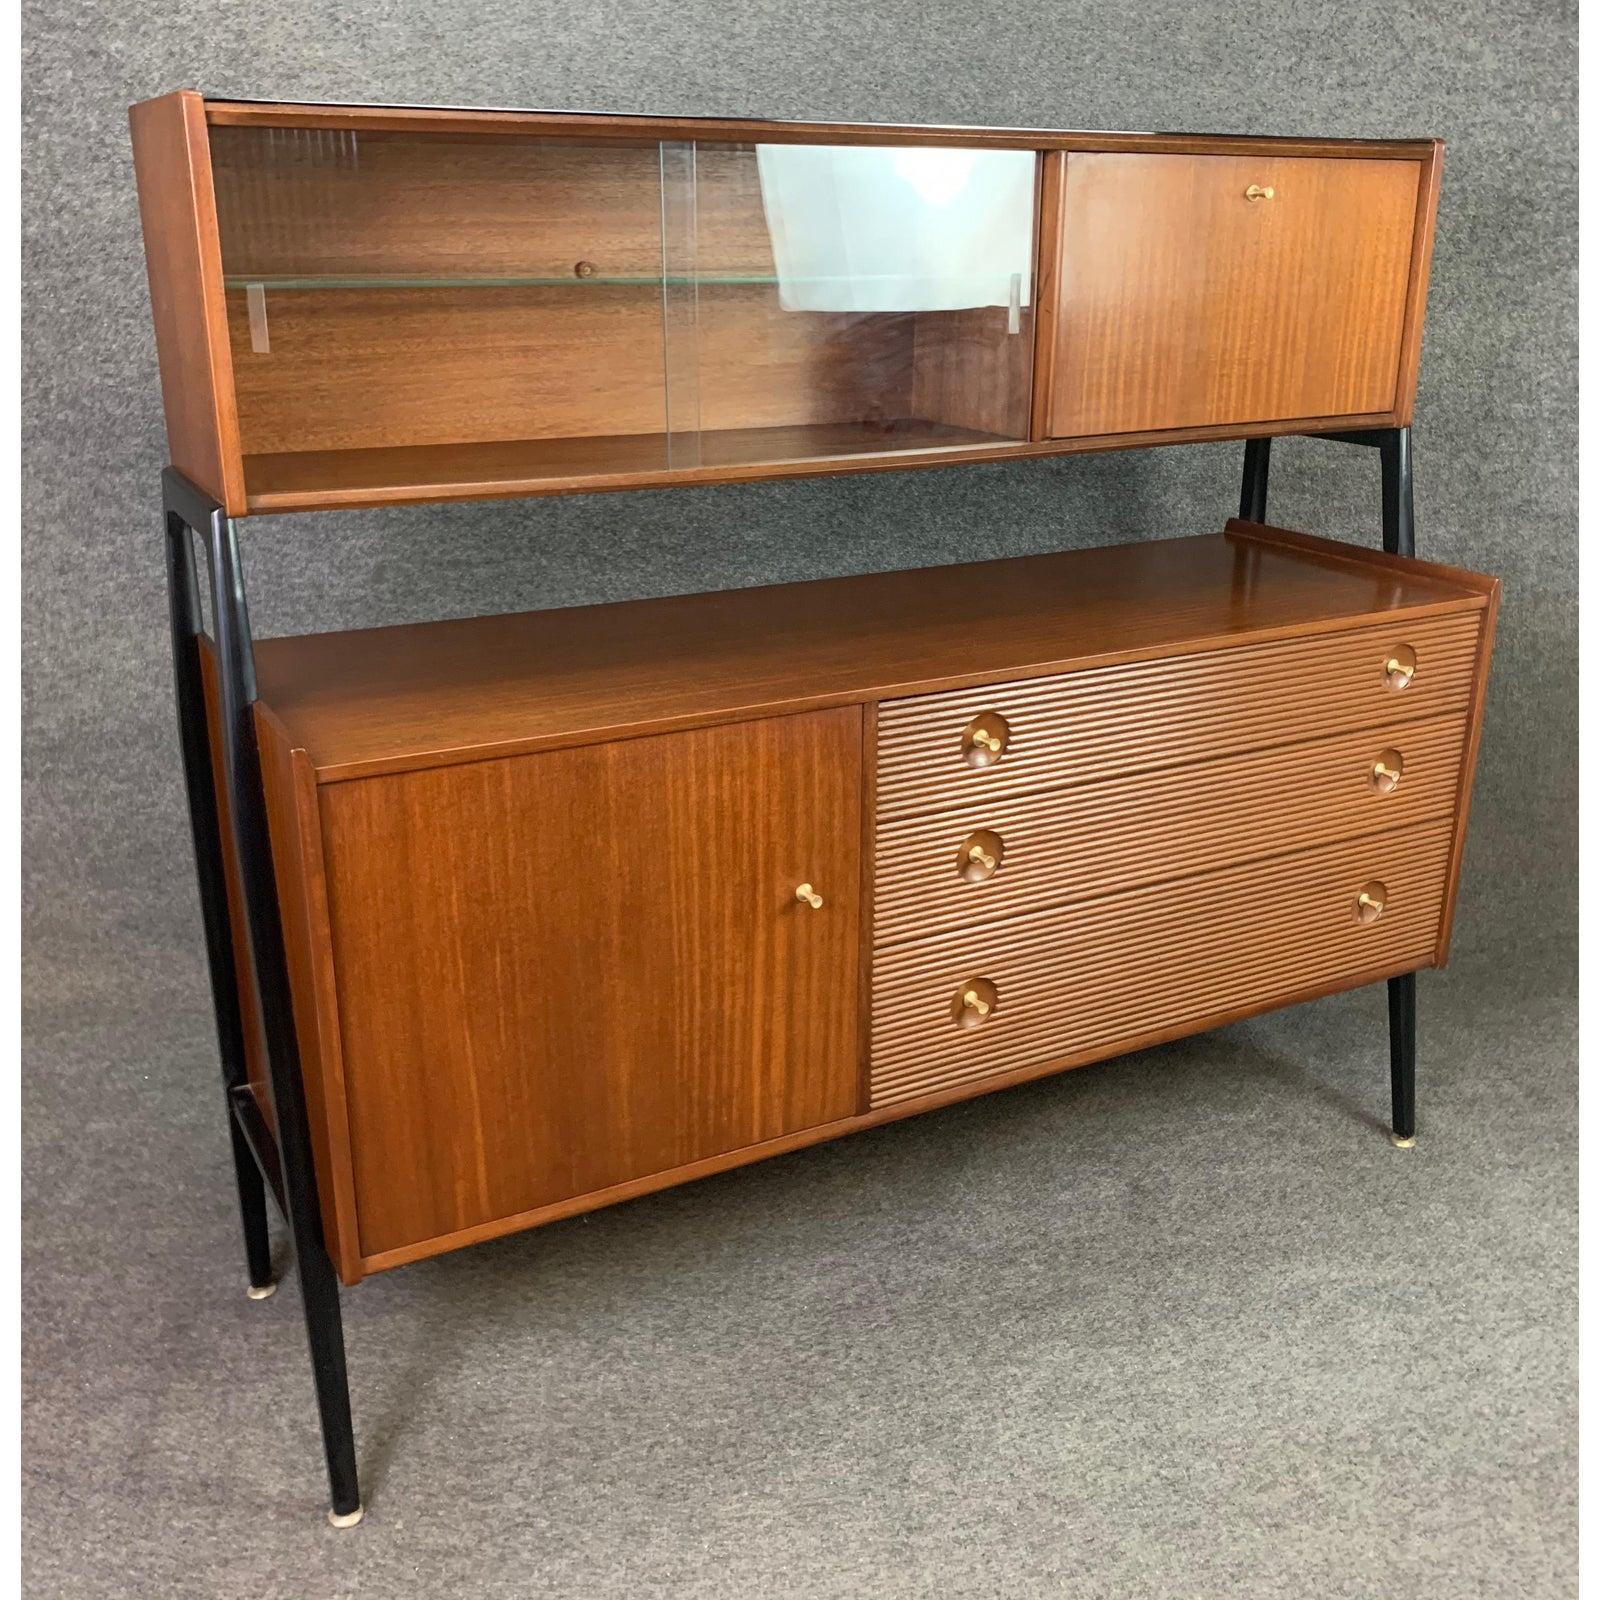 Here is a rare 1960s case piece in mahogany manufactured in England by Nathan in the 1960s.
This special hutch, recently imported from UK to California, features on its top a display cabinet with two glass sliding doors and a drop down door